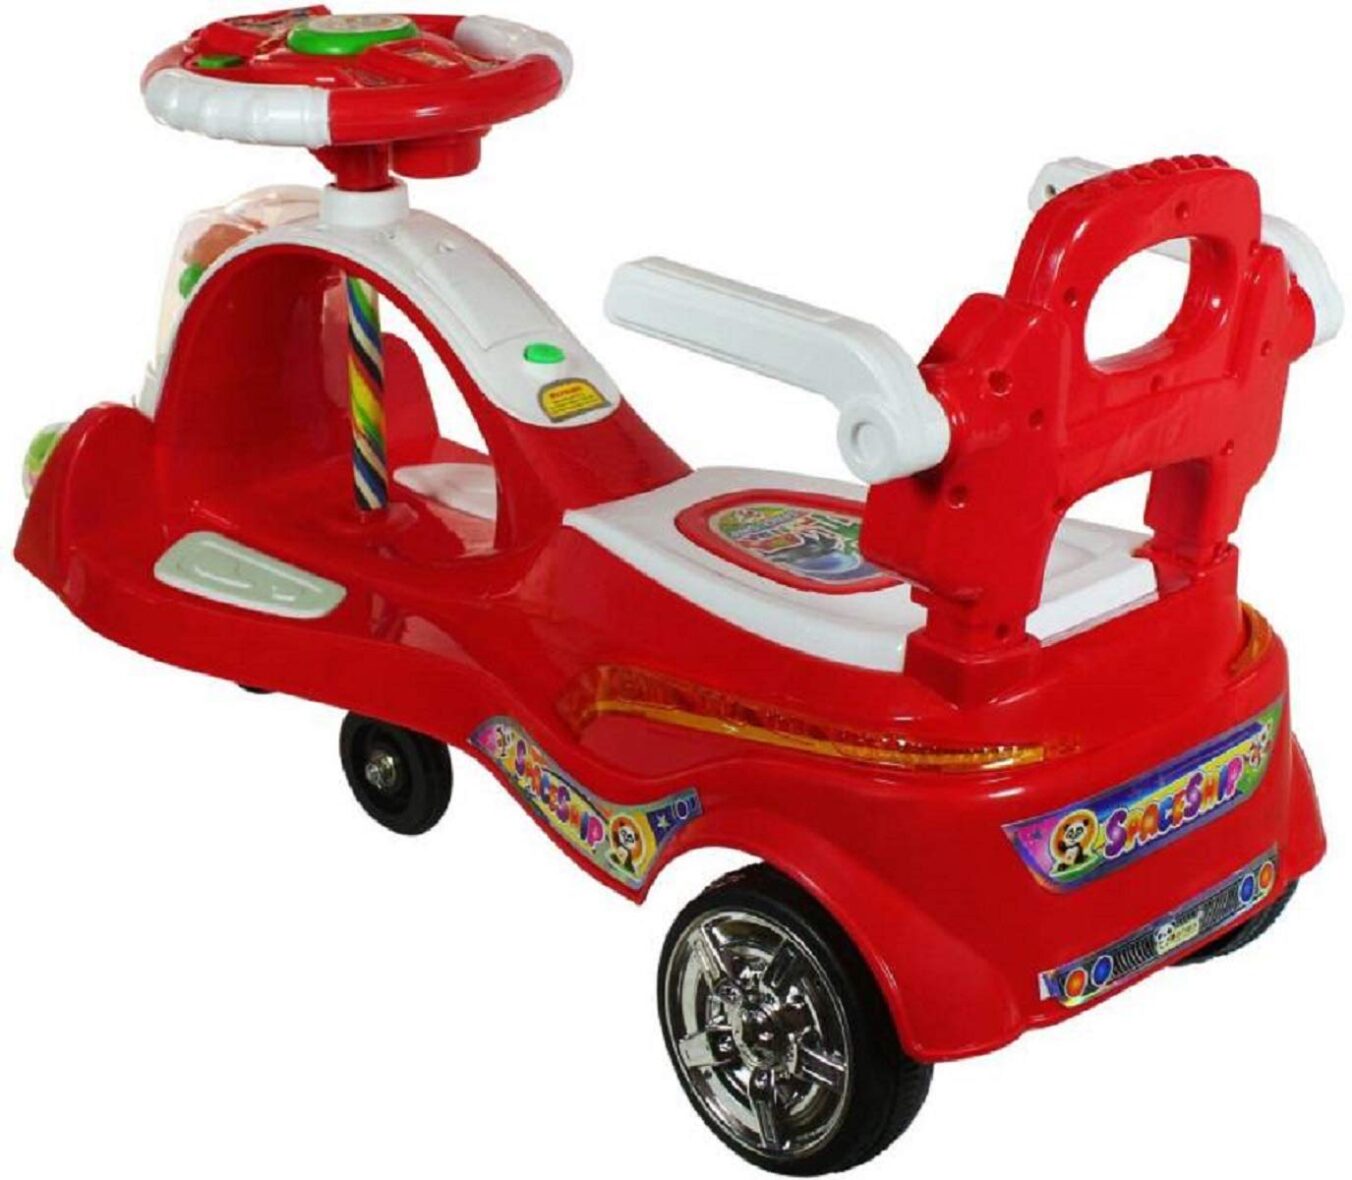 U Smile Plastic Space Swing Car for Kids (Red)